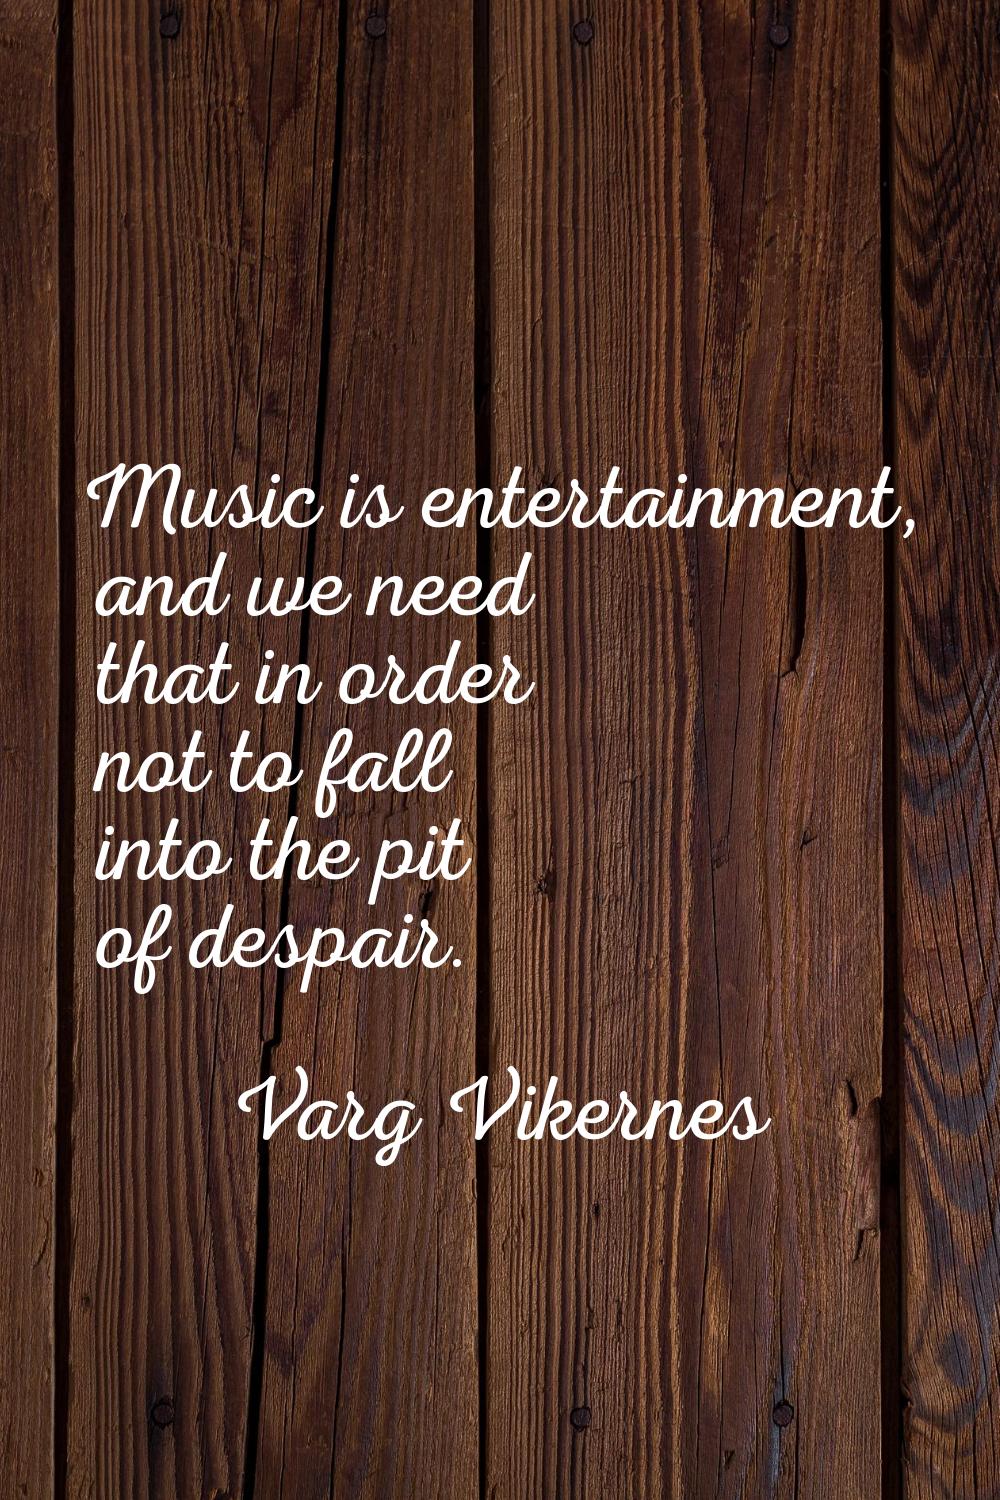 Music is entertainment, and we need that in order not to fall into the pit of despair.